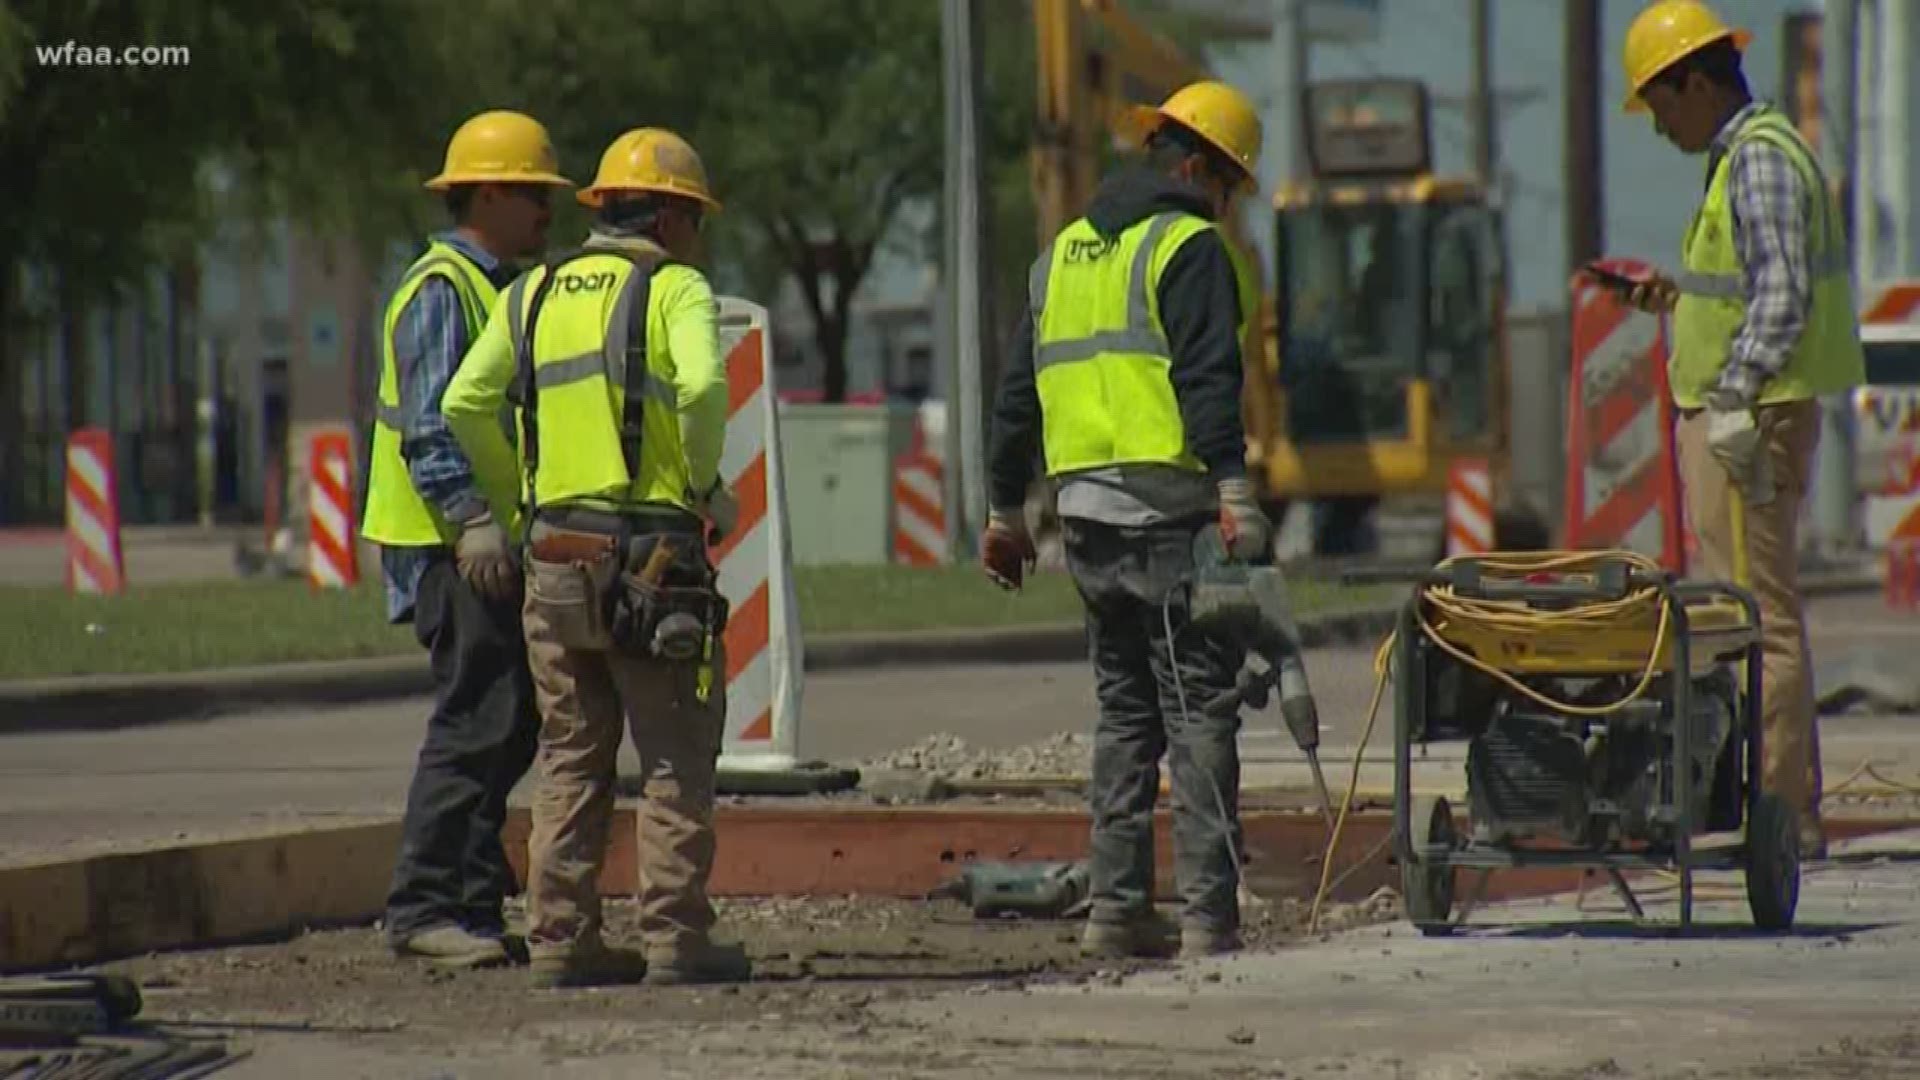 WFAA found crews across North Texas working in close contact with no protective gear.